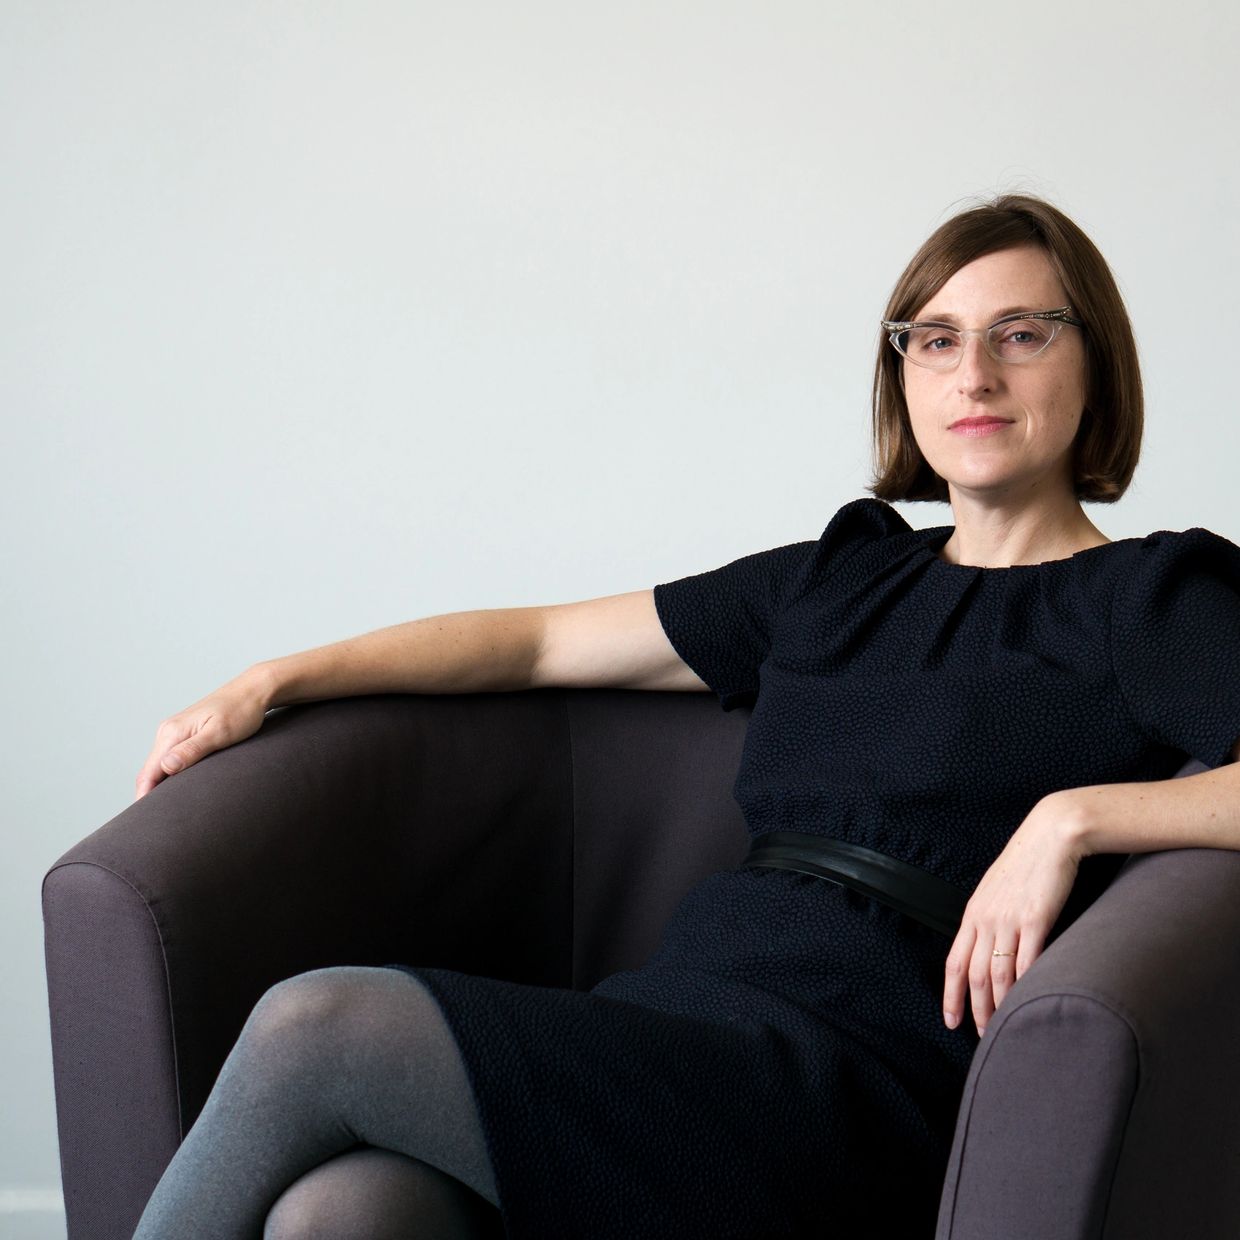 Woman with short brown hair, cat eyeglasses, in a relaxed pose. Photo credit: Ilme Vysniauskaite.